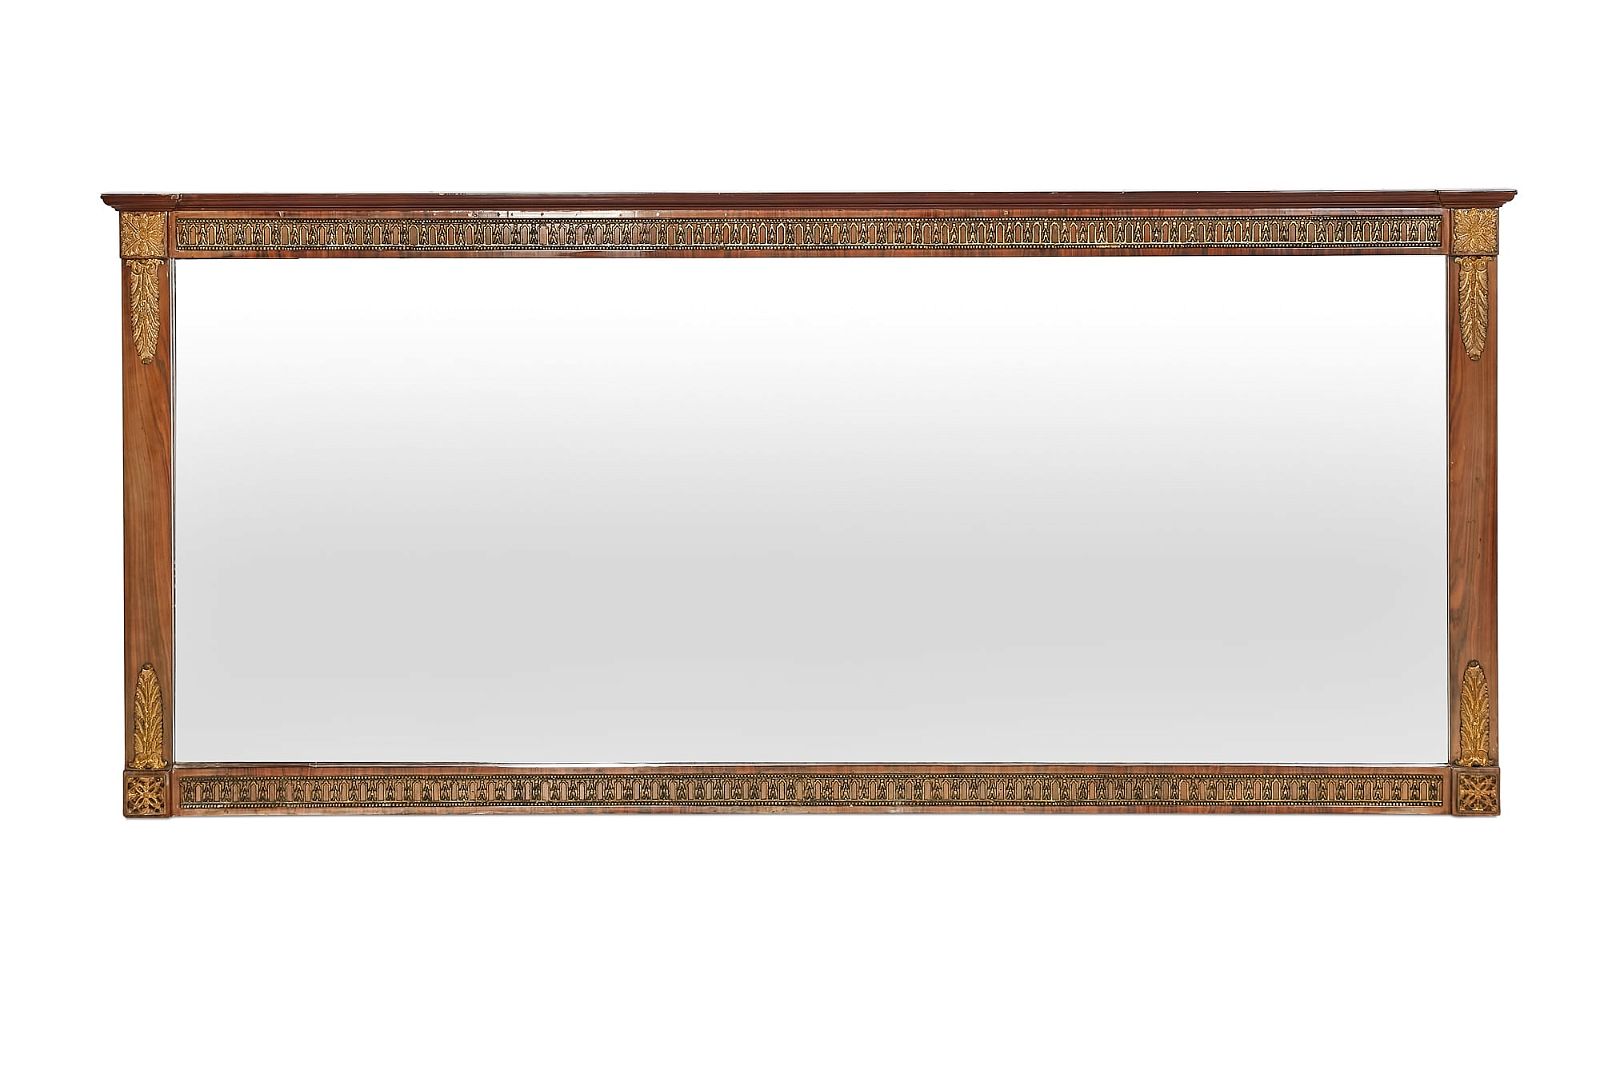 A NEOCLASSICAL STYLE WALNUT OVERMANTEL